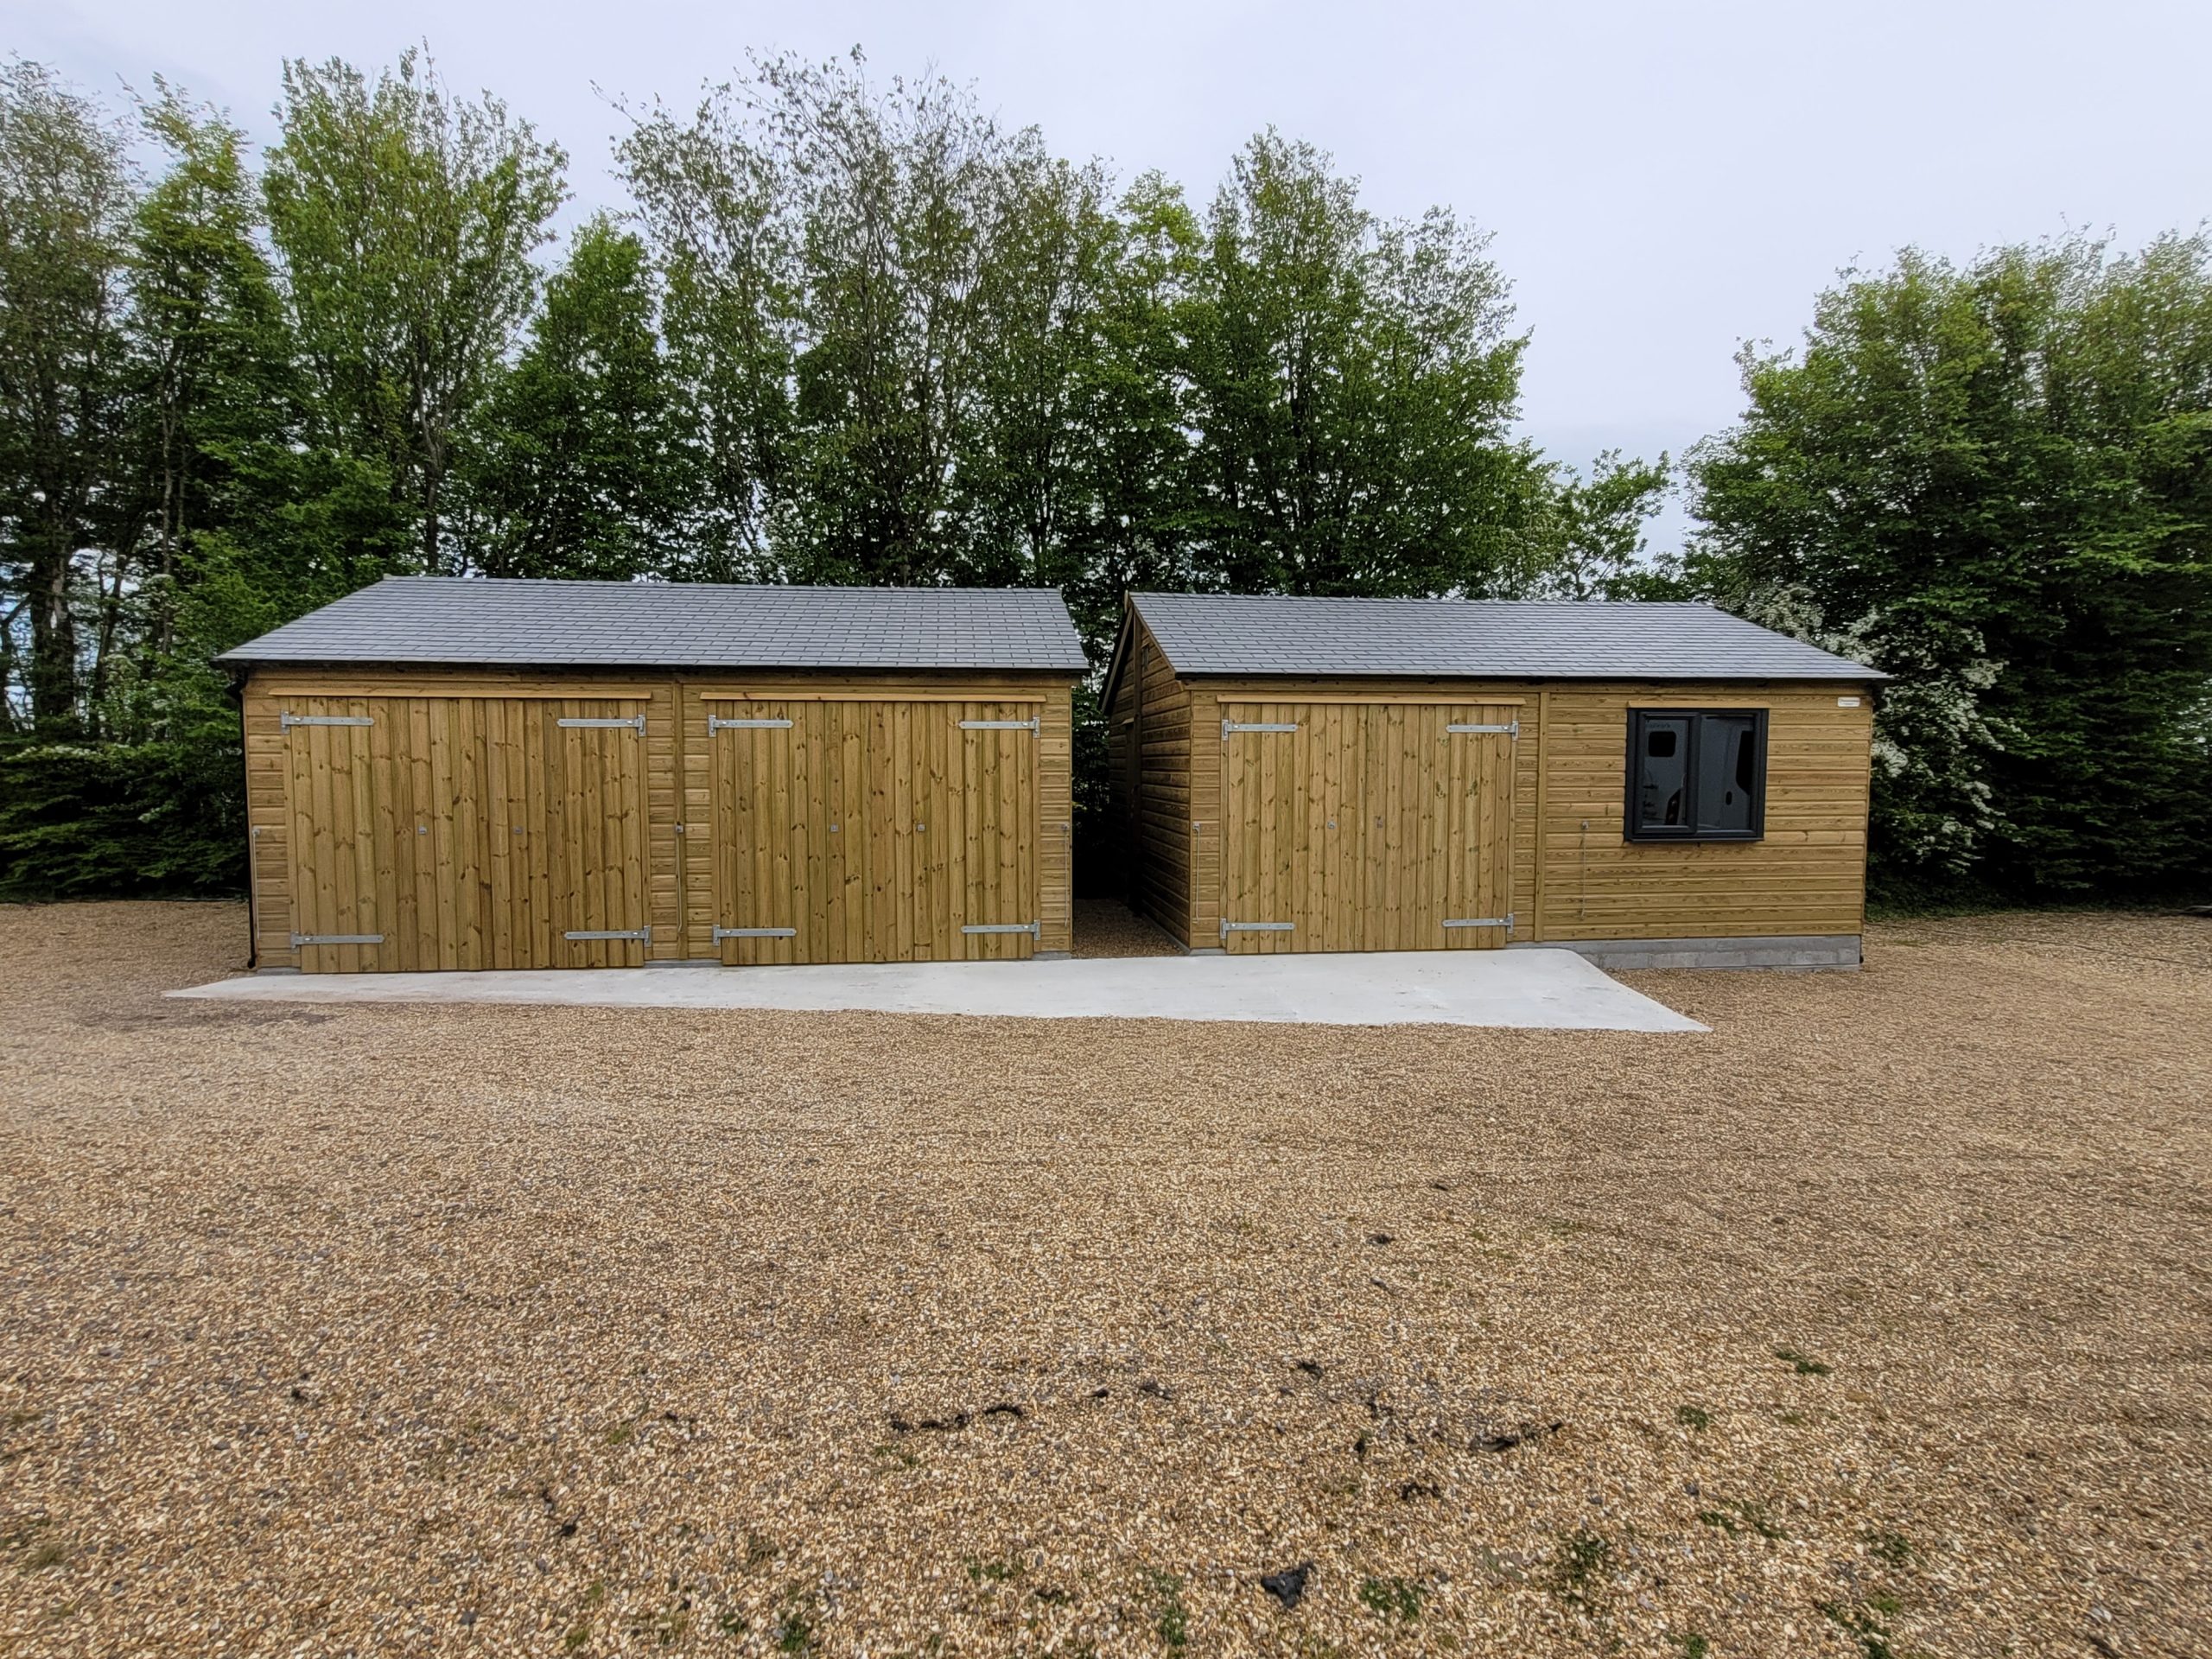 Timber double garages and combination building - bespoke wooden garages